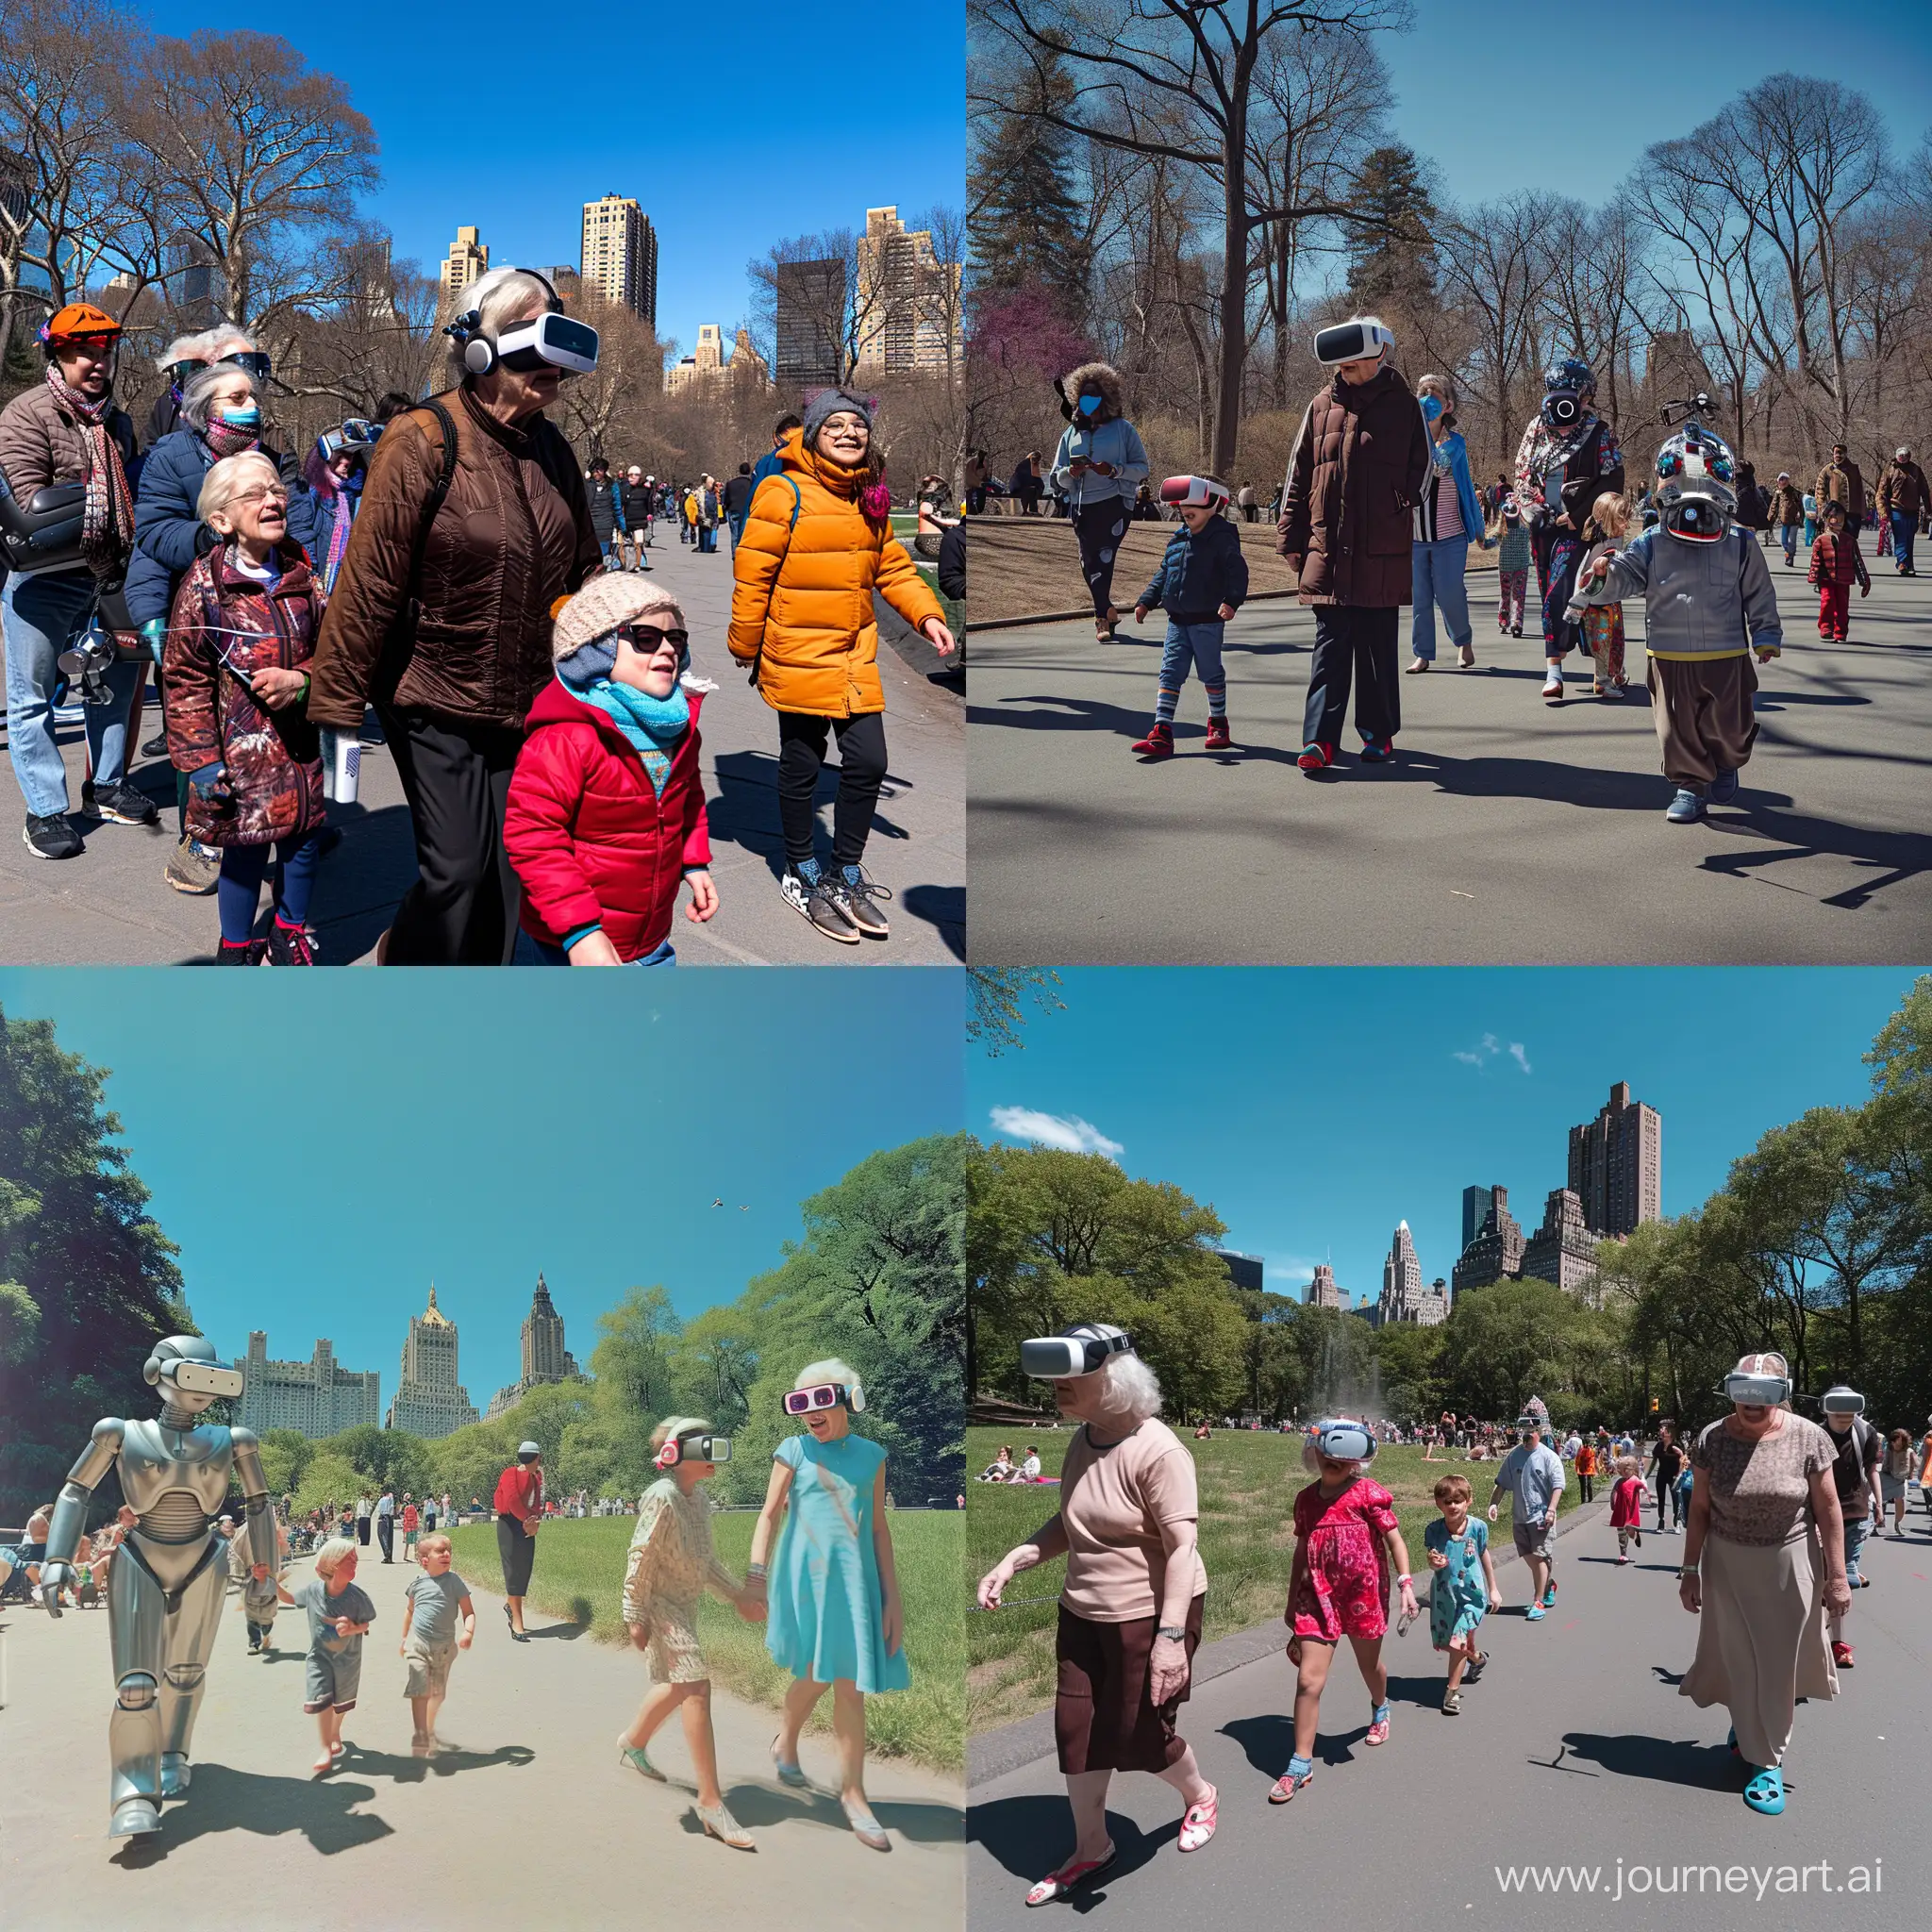 Central Park, New York, a sunny day with clear blue skies, elderly people accompanied by intelligent robots strolling along the pathways, children laughing and playing happily, young adults wearing portable VR goggles from the 90s, reminiscing the nostalgic Kodak moments. 